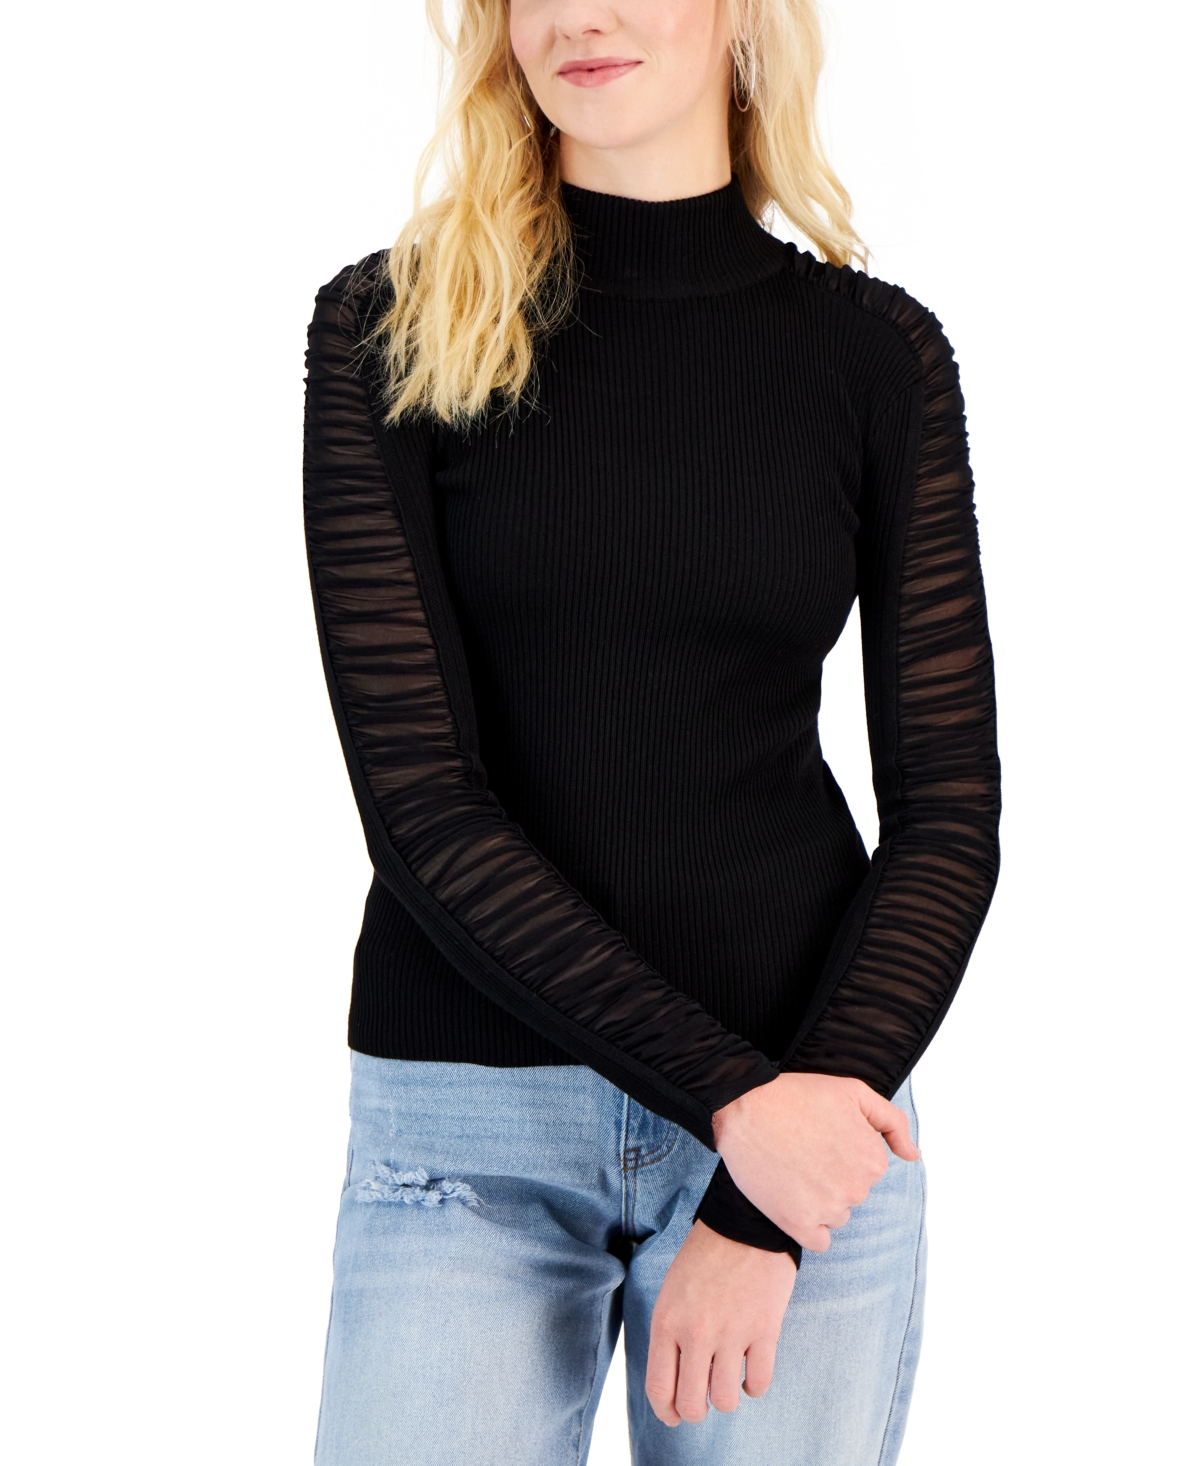 Crave Fame Juniors' Ruched Mesh-Sleeve Mock-Neck Sweater